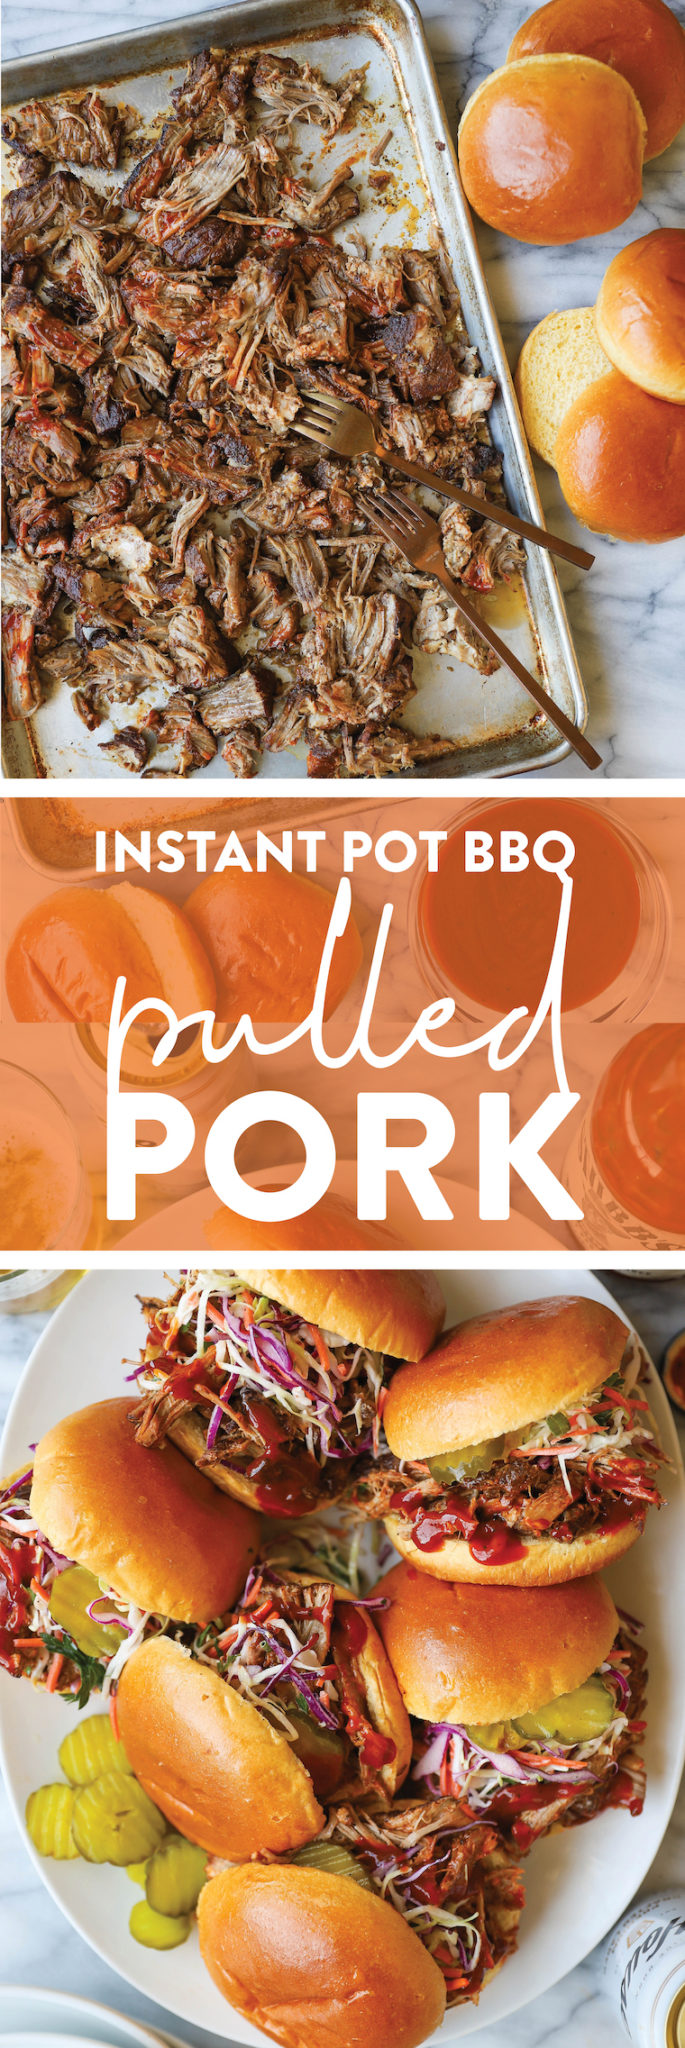 Instant Pot BBQ Pulled Pork - Damn Delicious